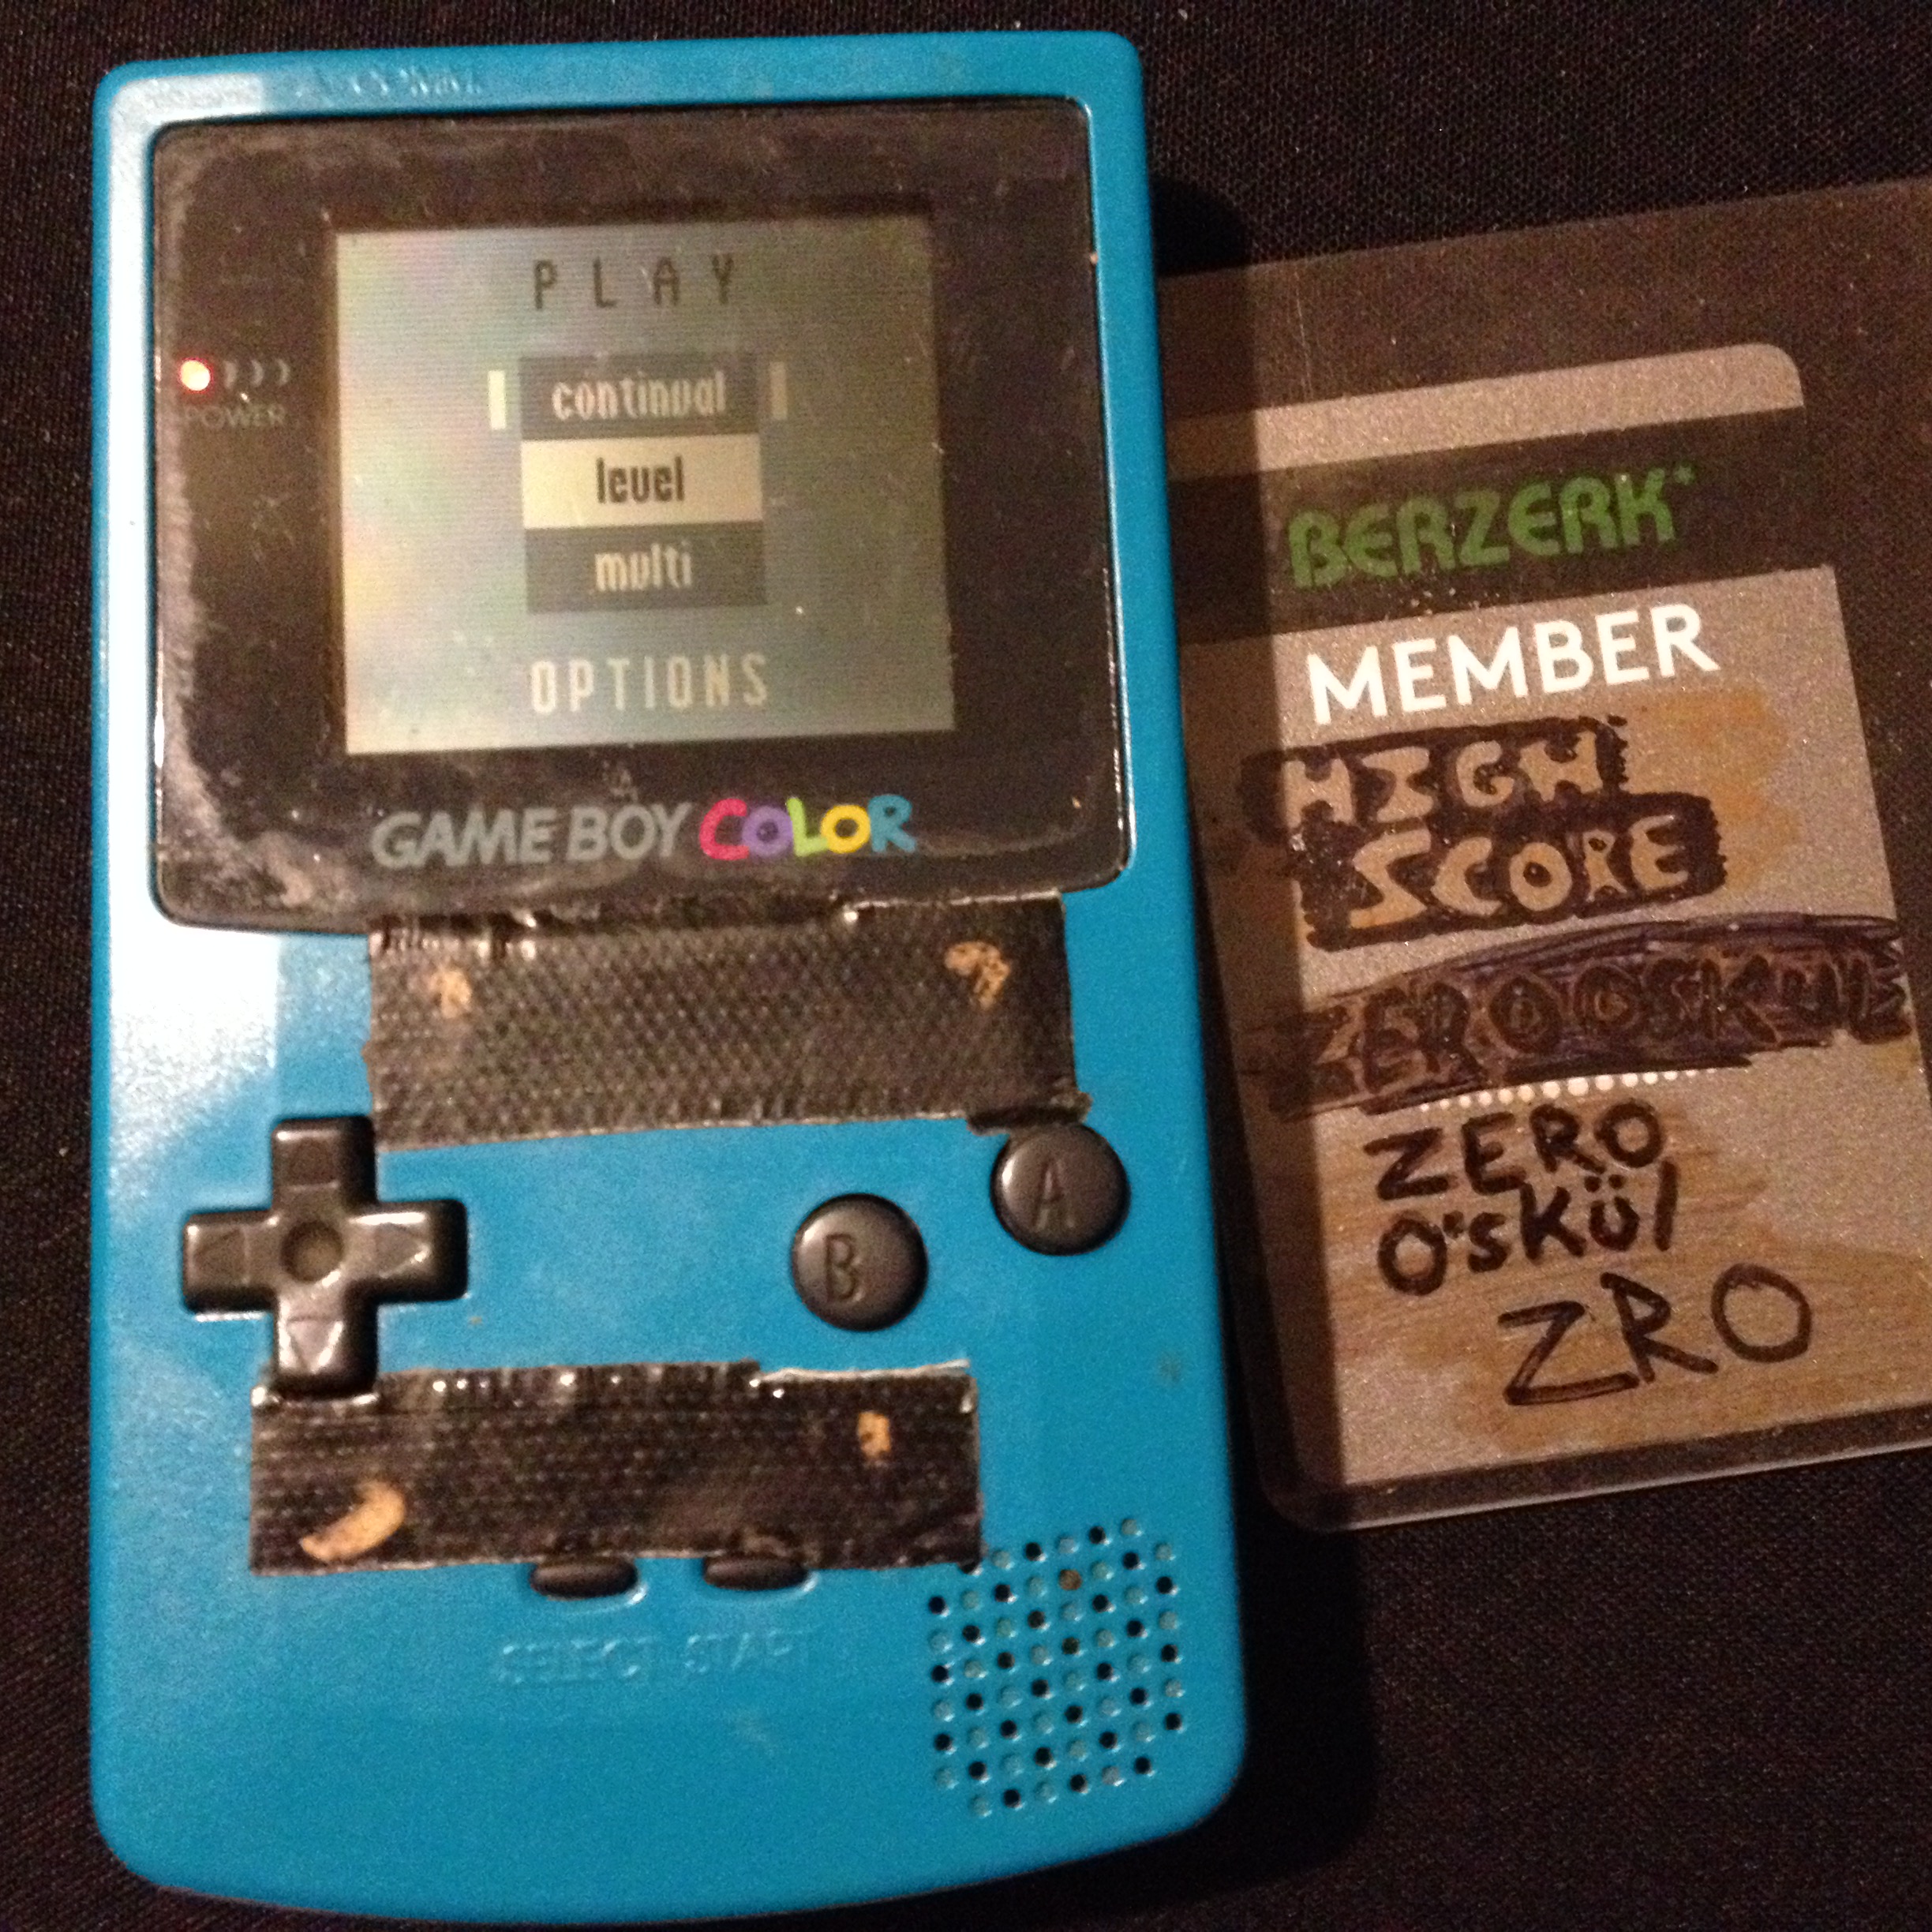 zerooskul: Zoop [Continual Mode] (Game Boy) 10,440 points on 2019-08-07 21:23:18